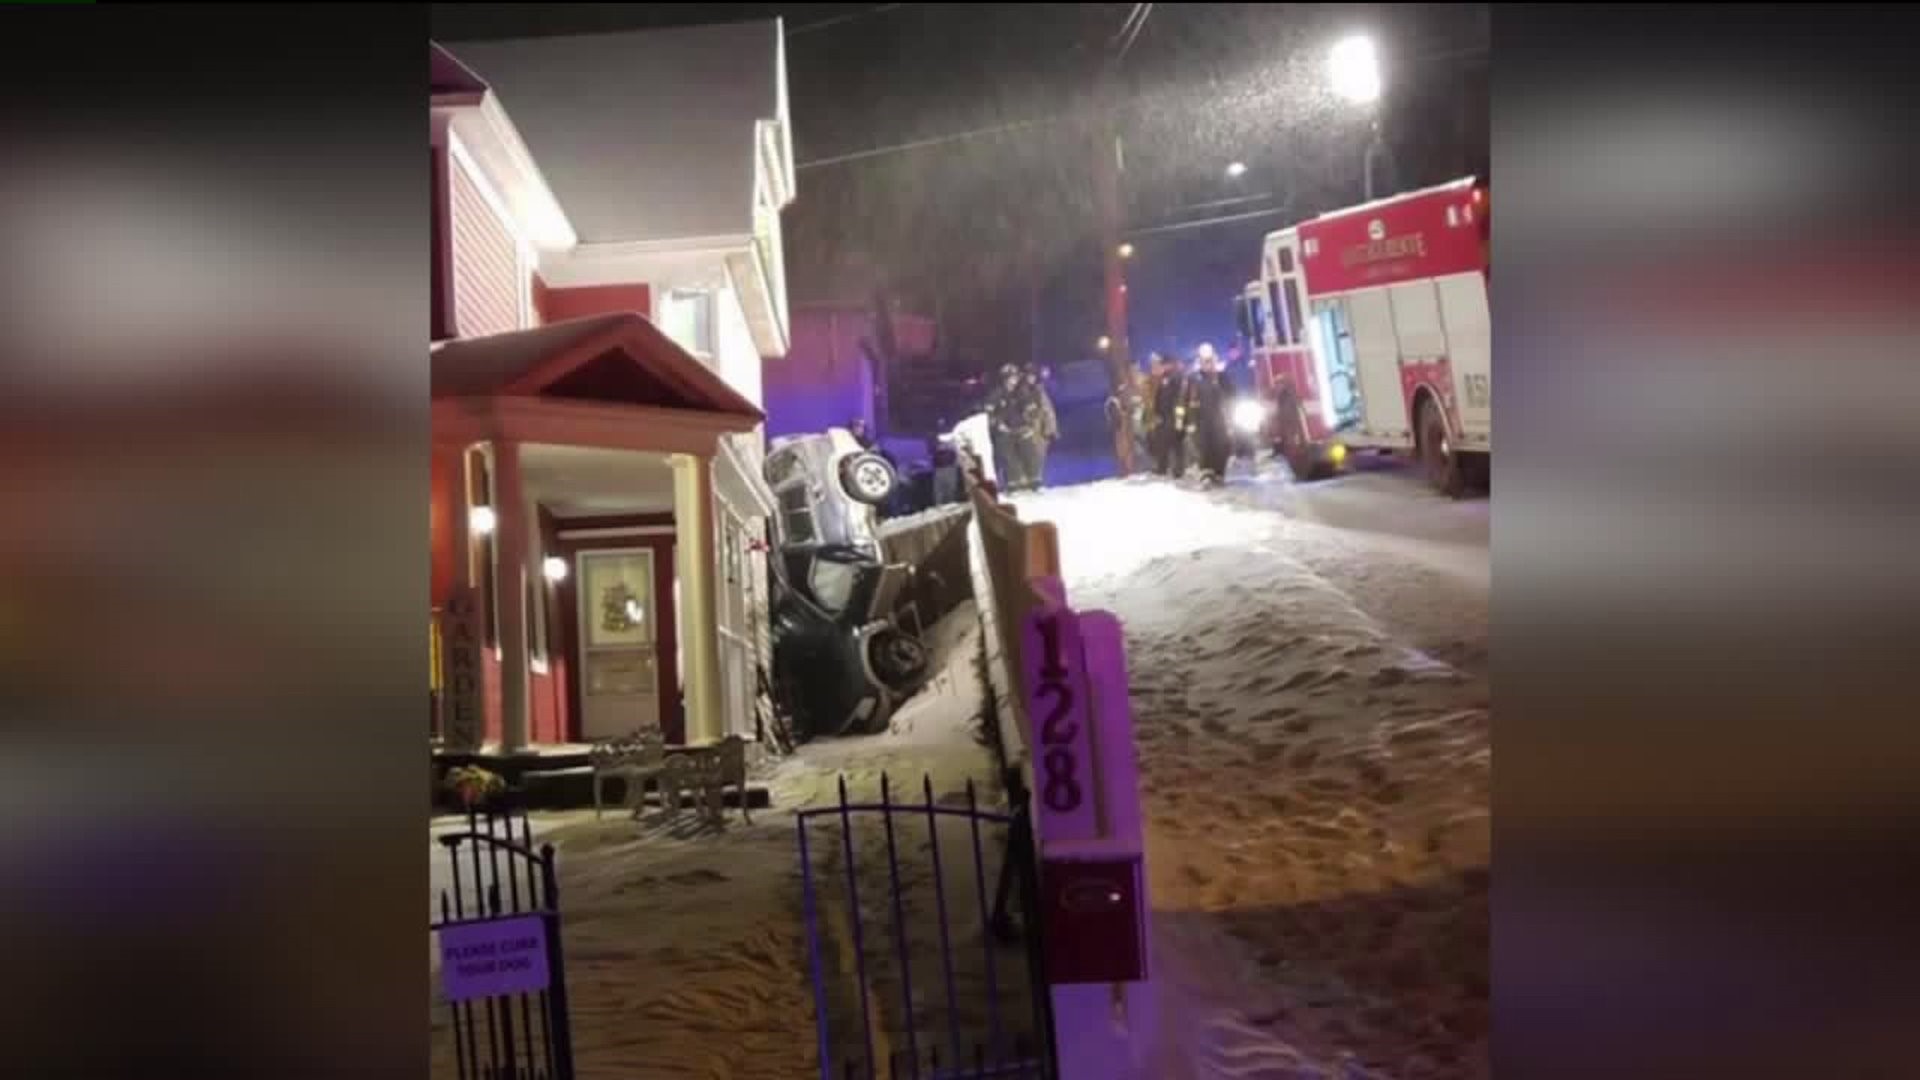 SUV Crashes into Home in Carbondale